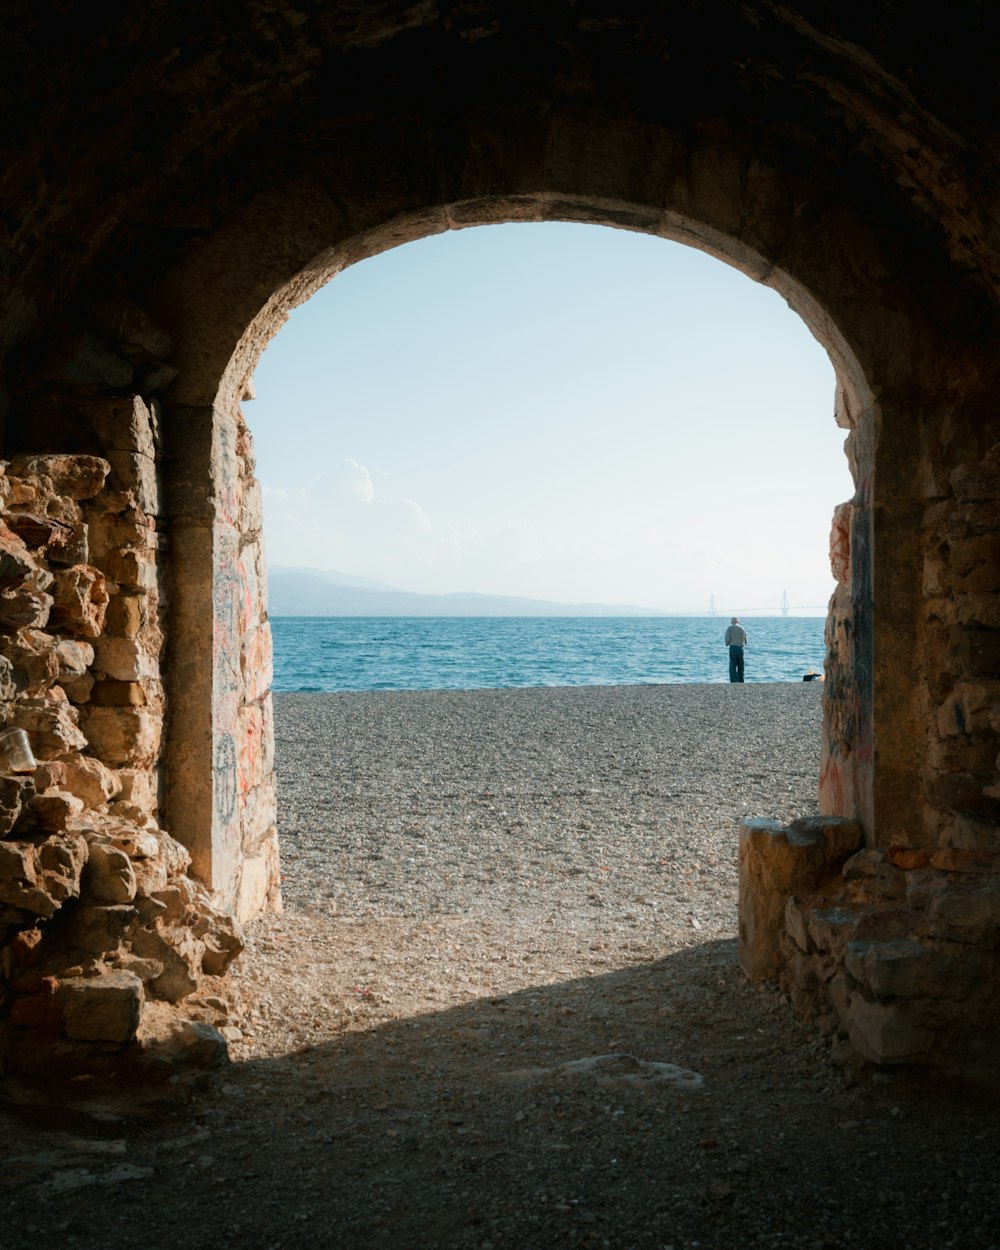 a person standing in an archway on a beach